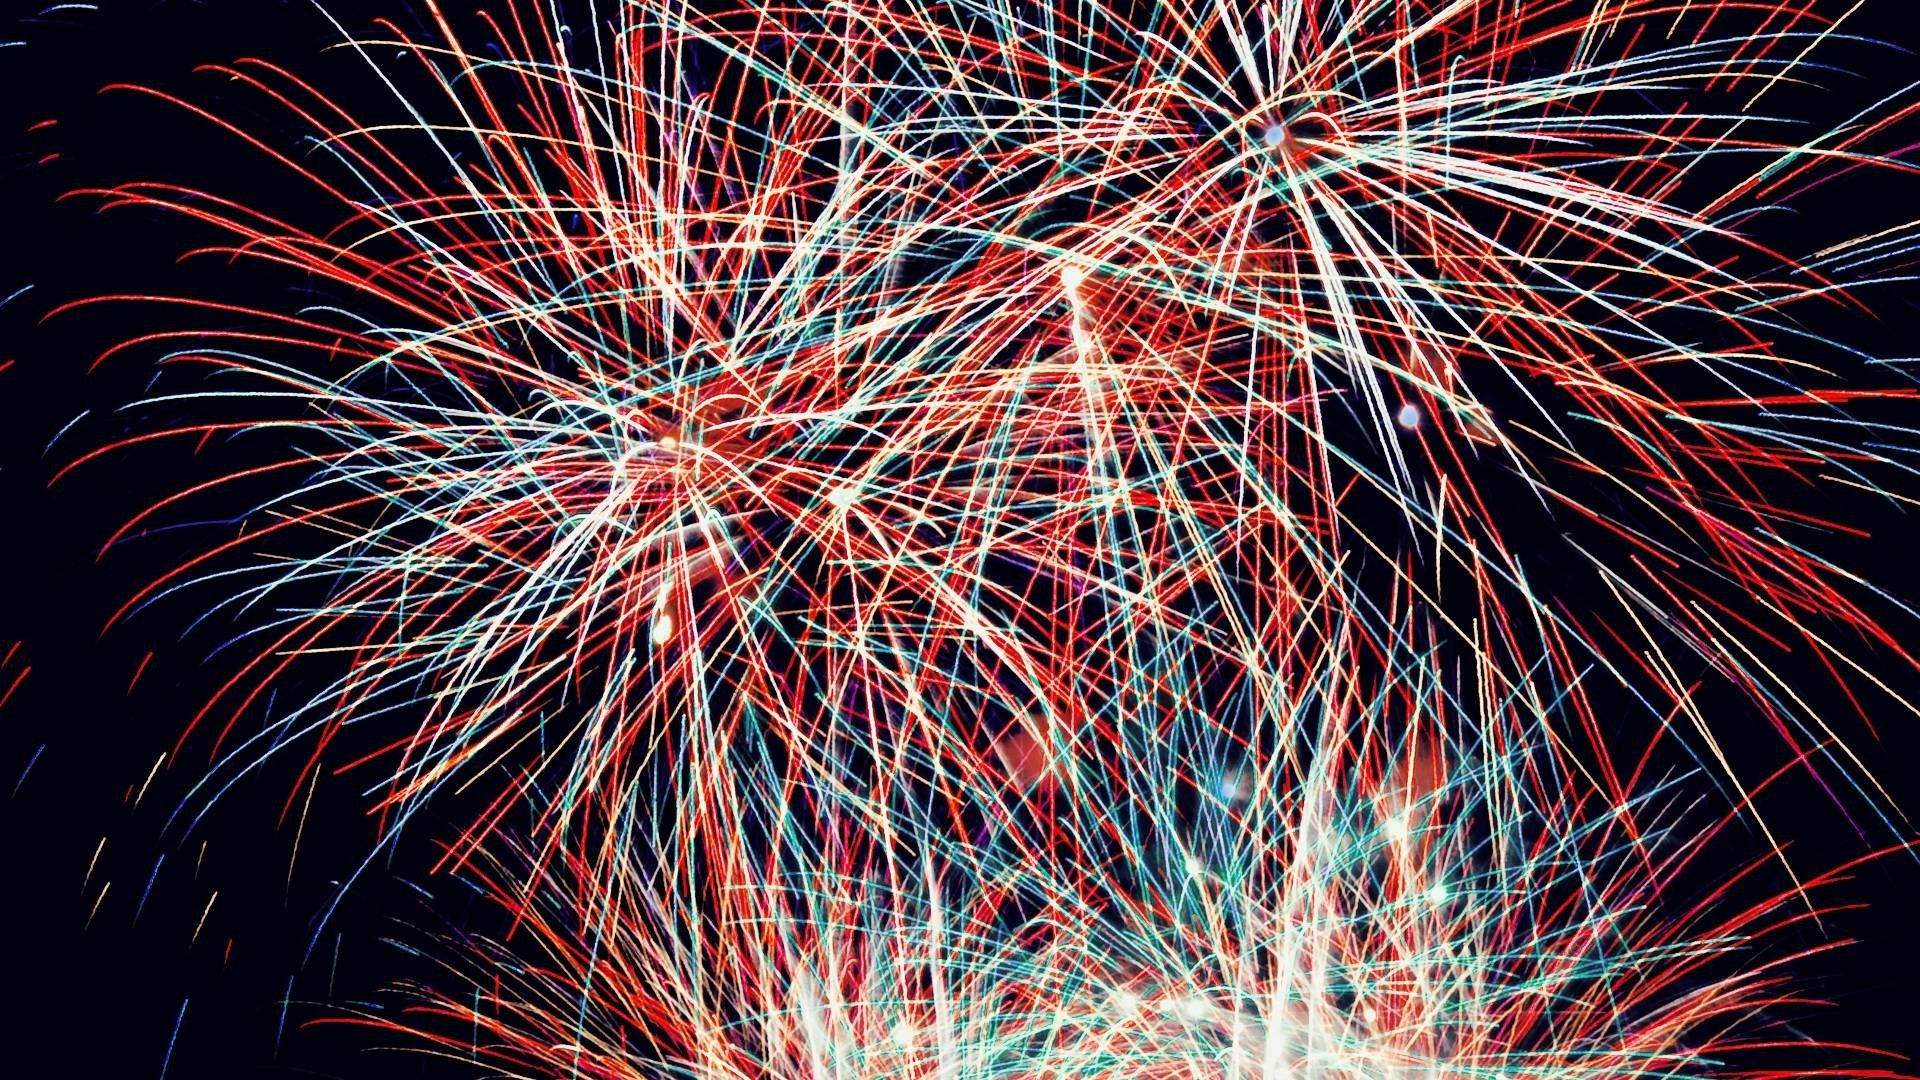 Enjoy the beauty of 4th of July fireworks! Wallpaper